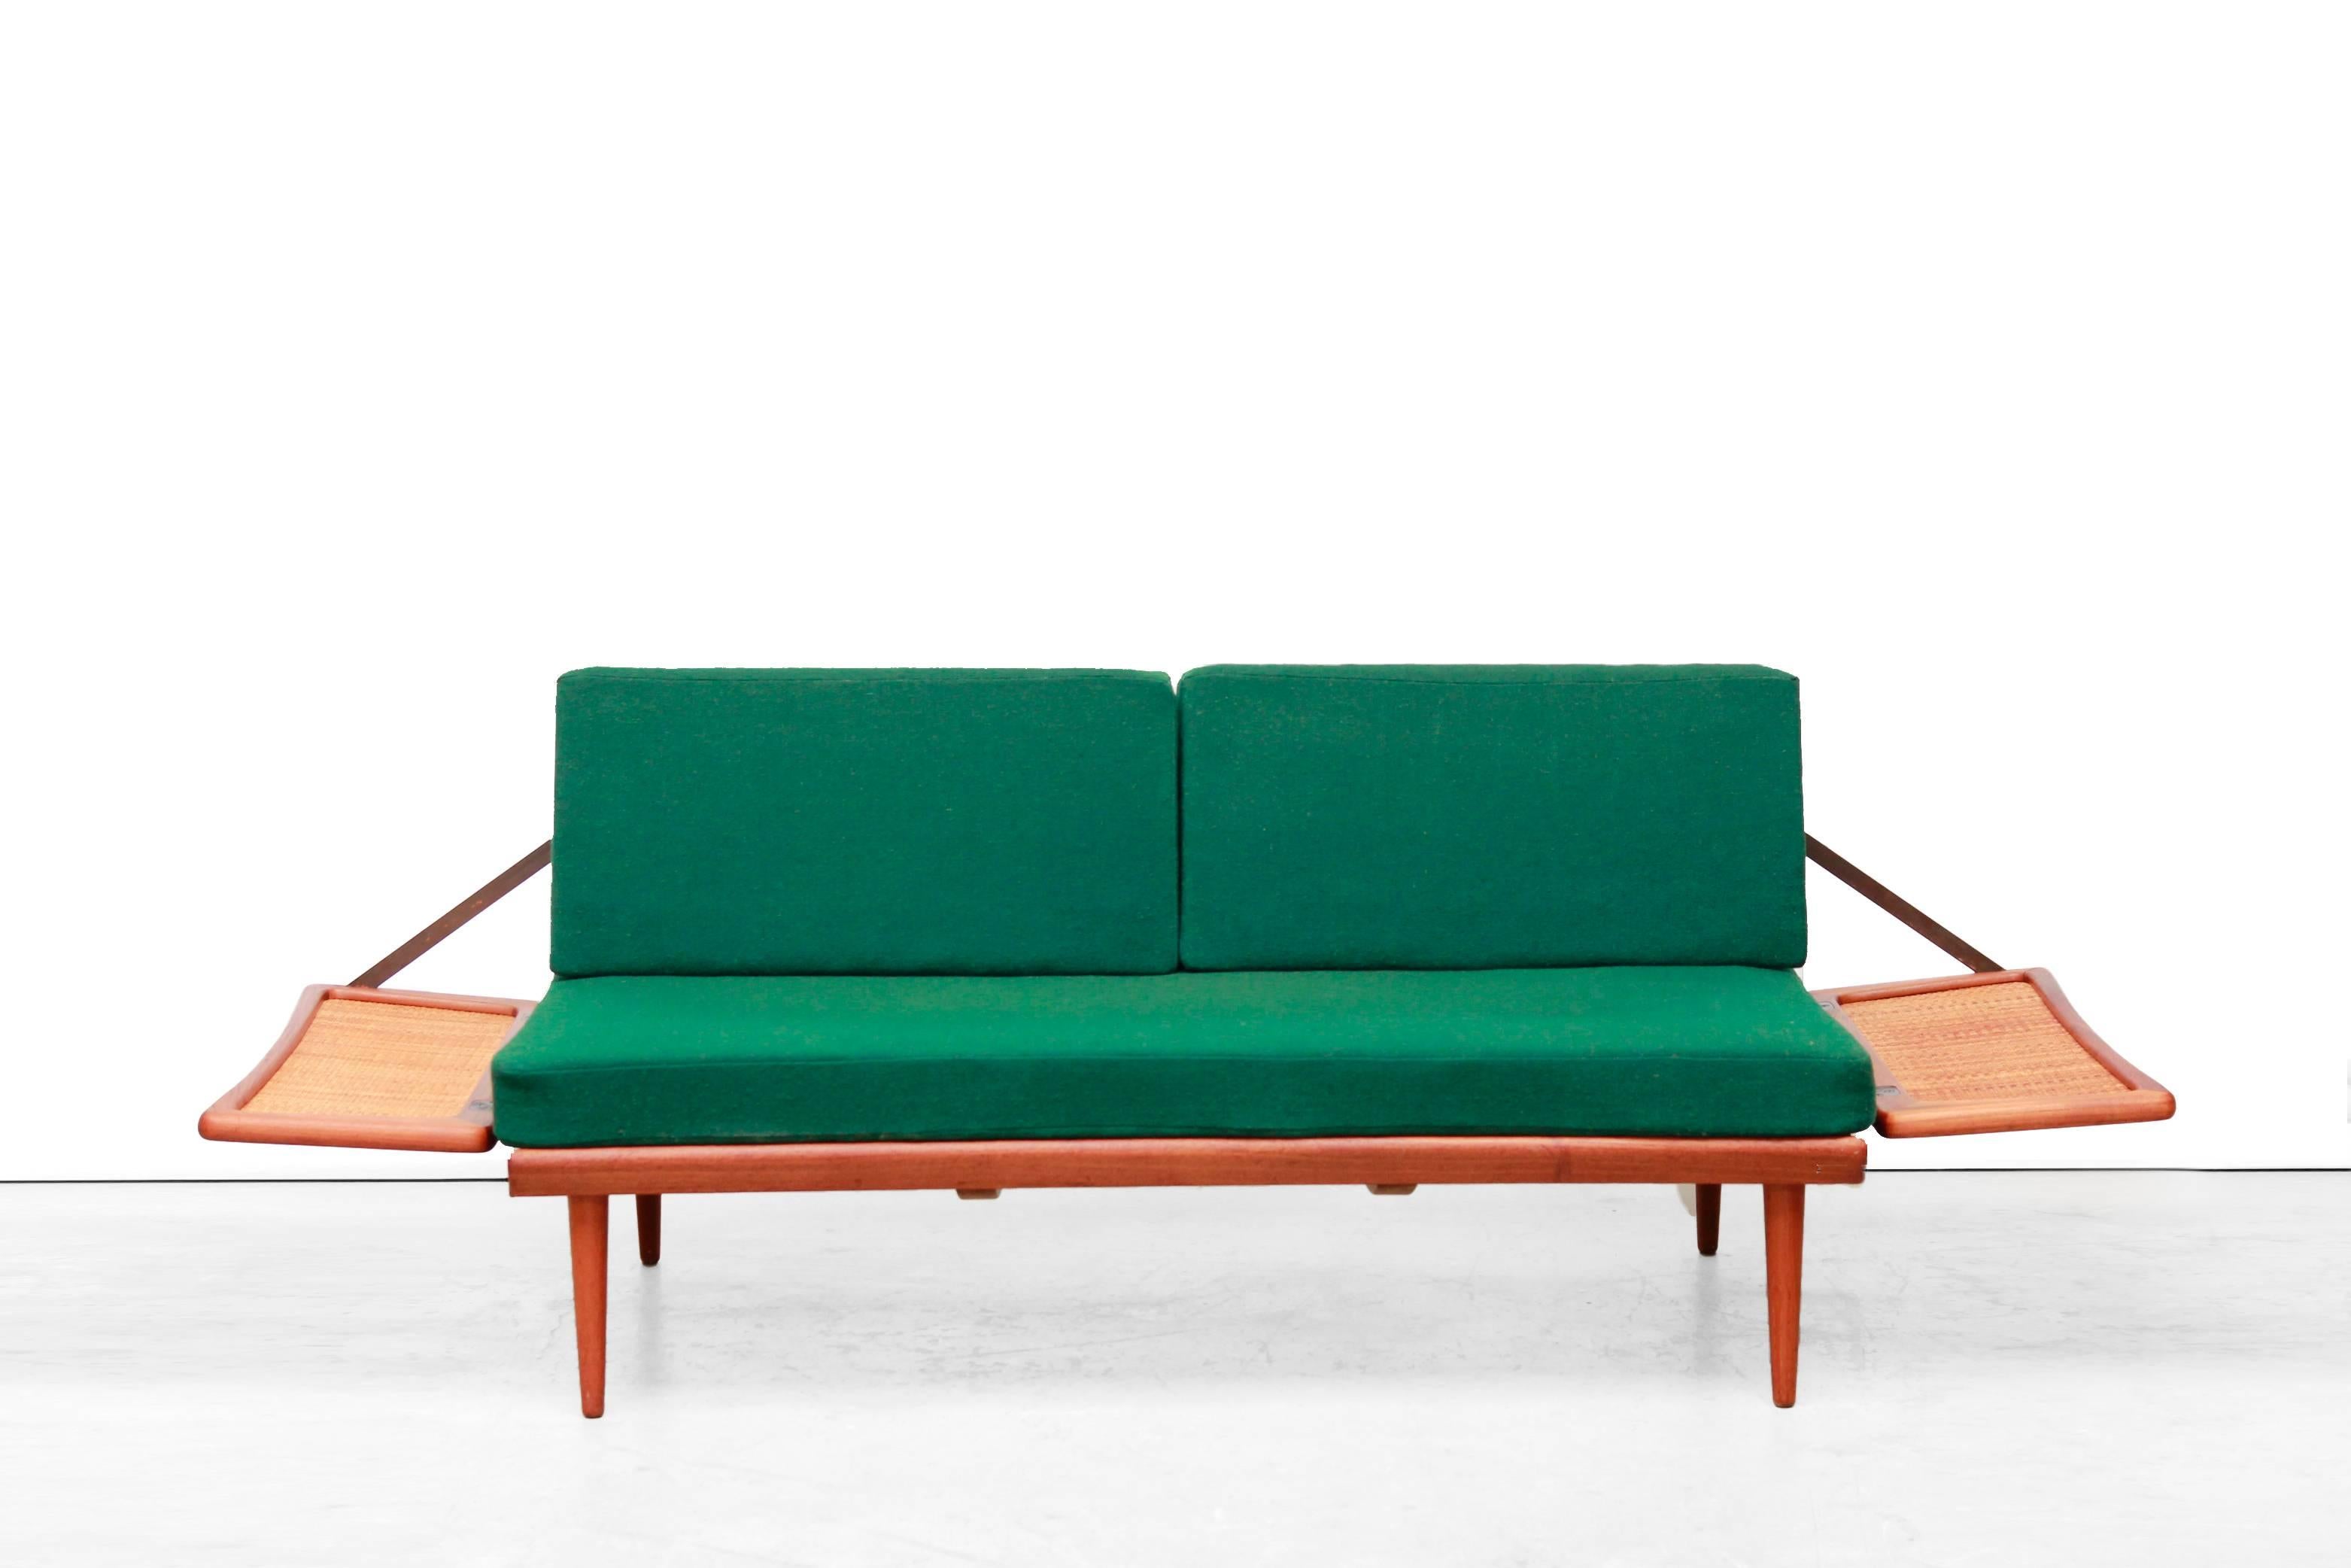 Particularly beautiful and rare sofa bed by Peter Hvidt and Orla Mølgaard Nielsen. 
This daybed with modelnam FD 451 os produced by France & Daverkosen in Denmark. The frame is made of solid teak wood and is of very high quality, with woven cane